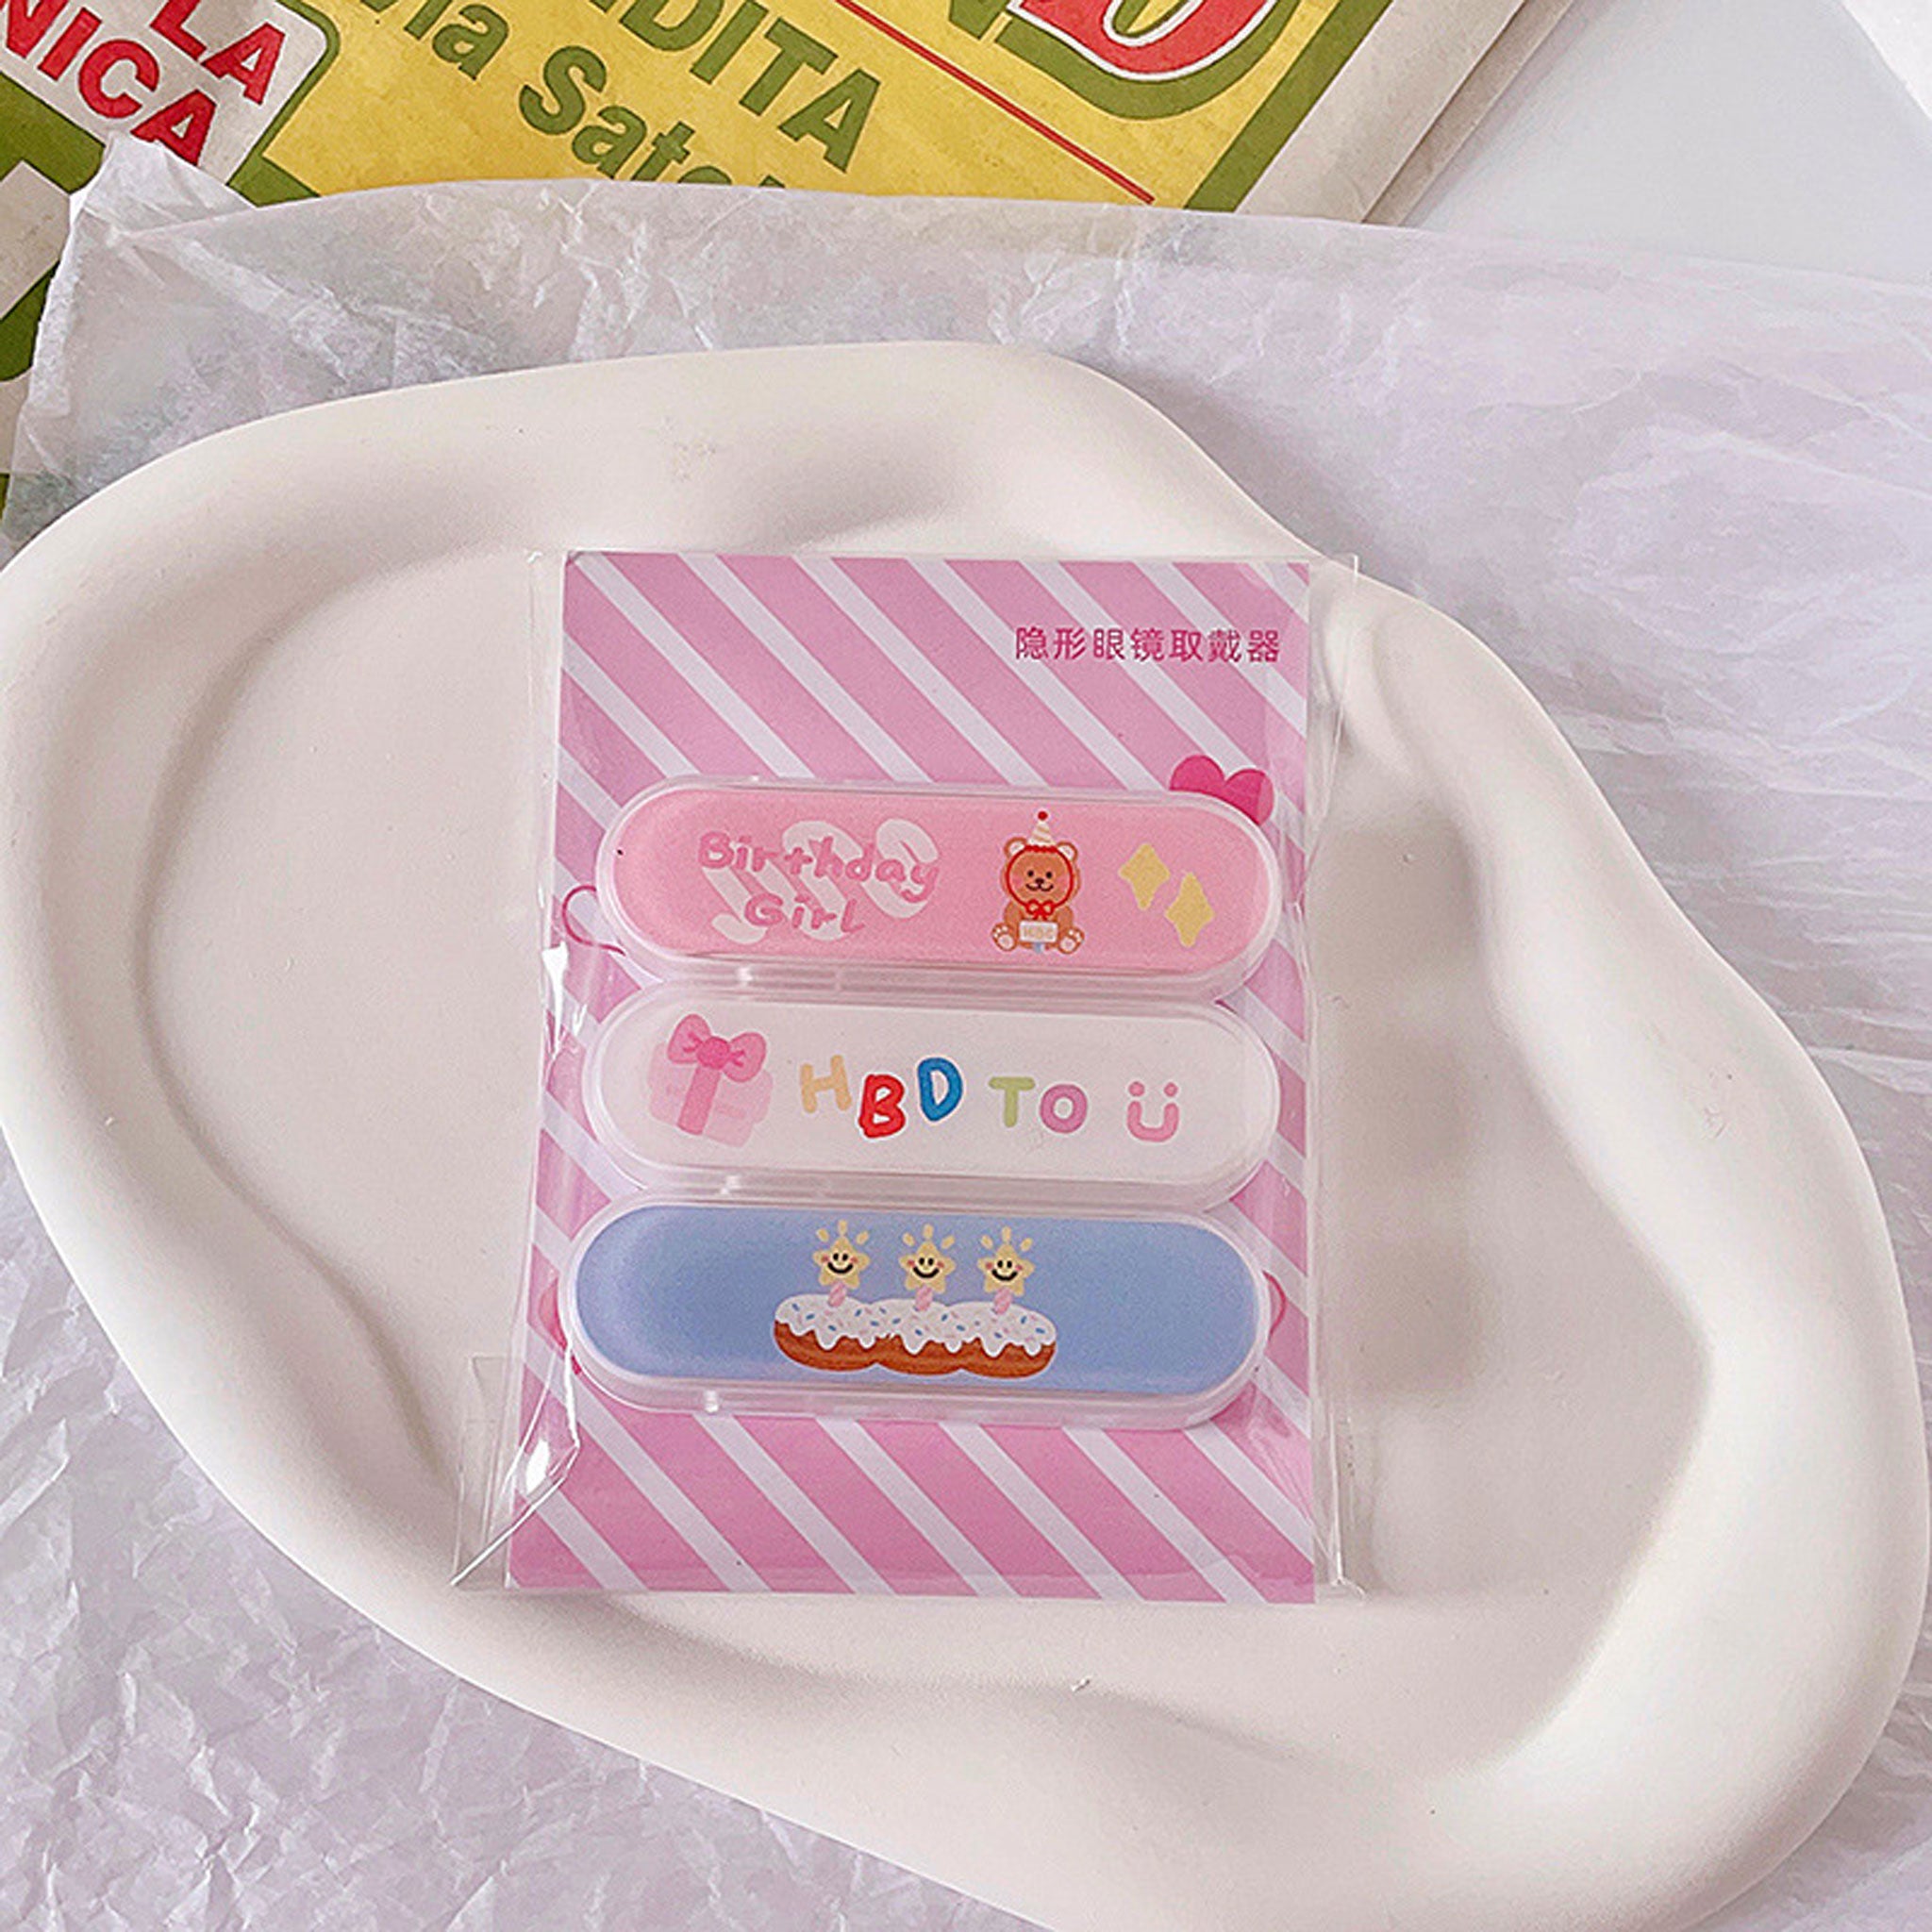 Contact Lens Wear Accessories 3pairs